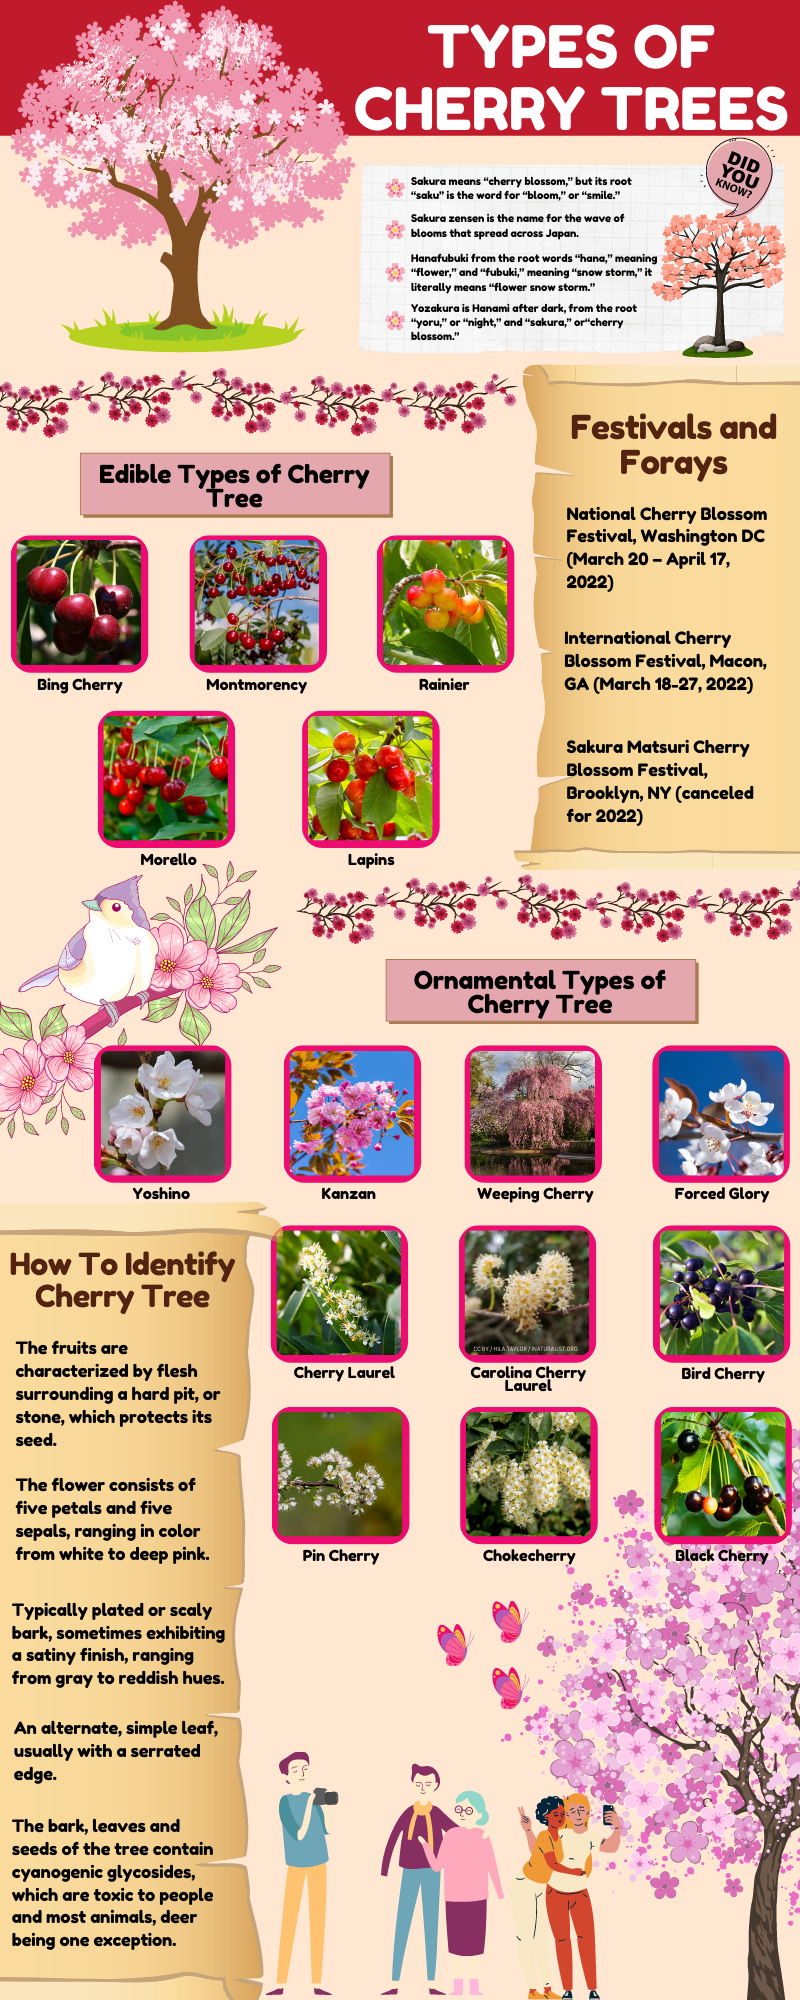 Types of cherry trees chart and infographic with the different species and types of both ornamental and edible cherry trees